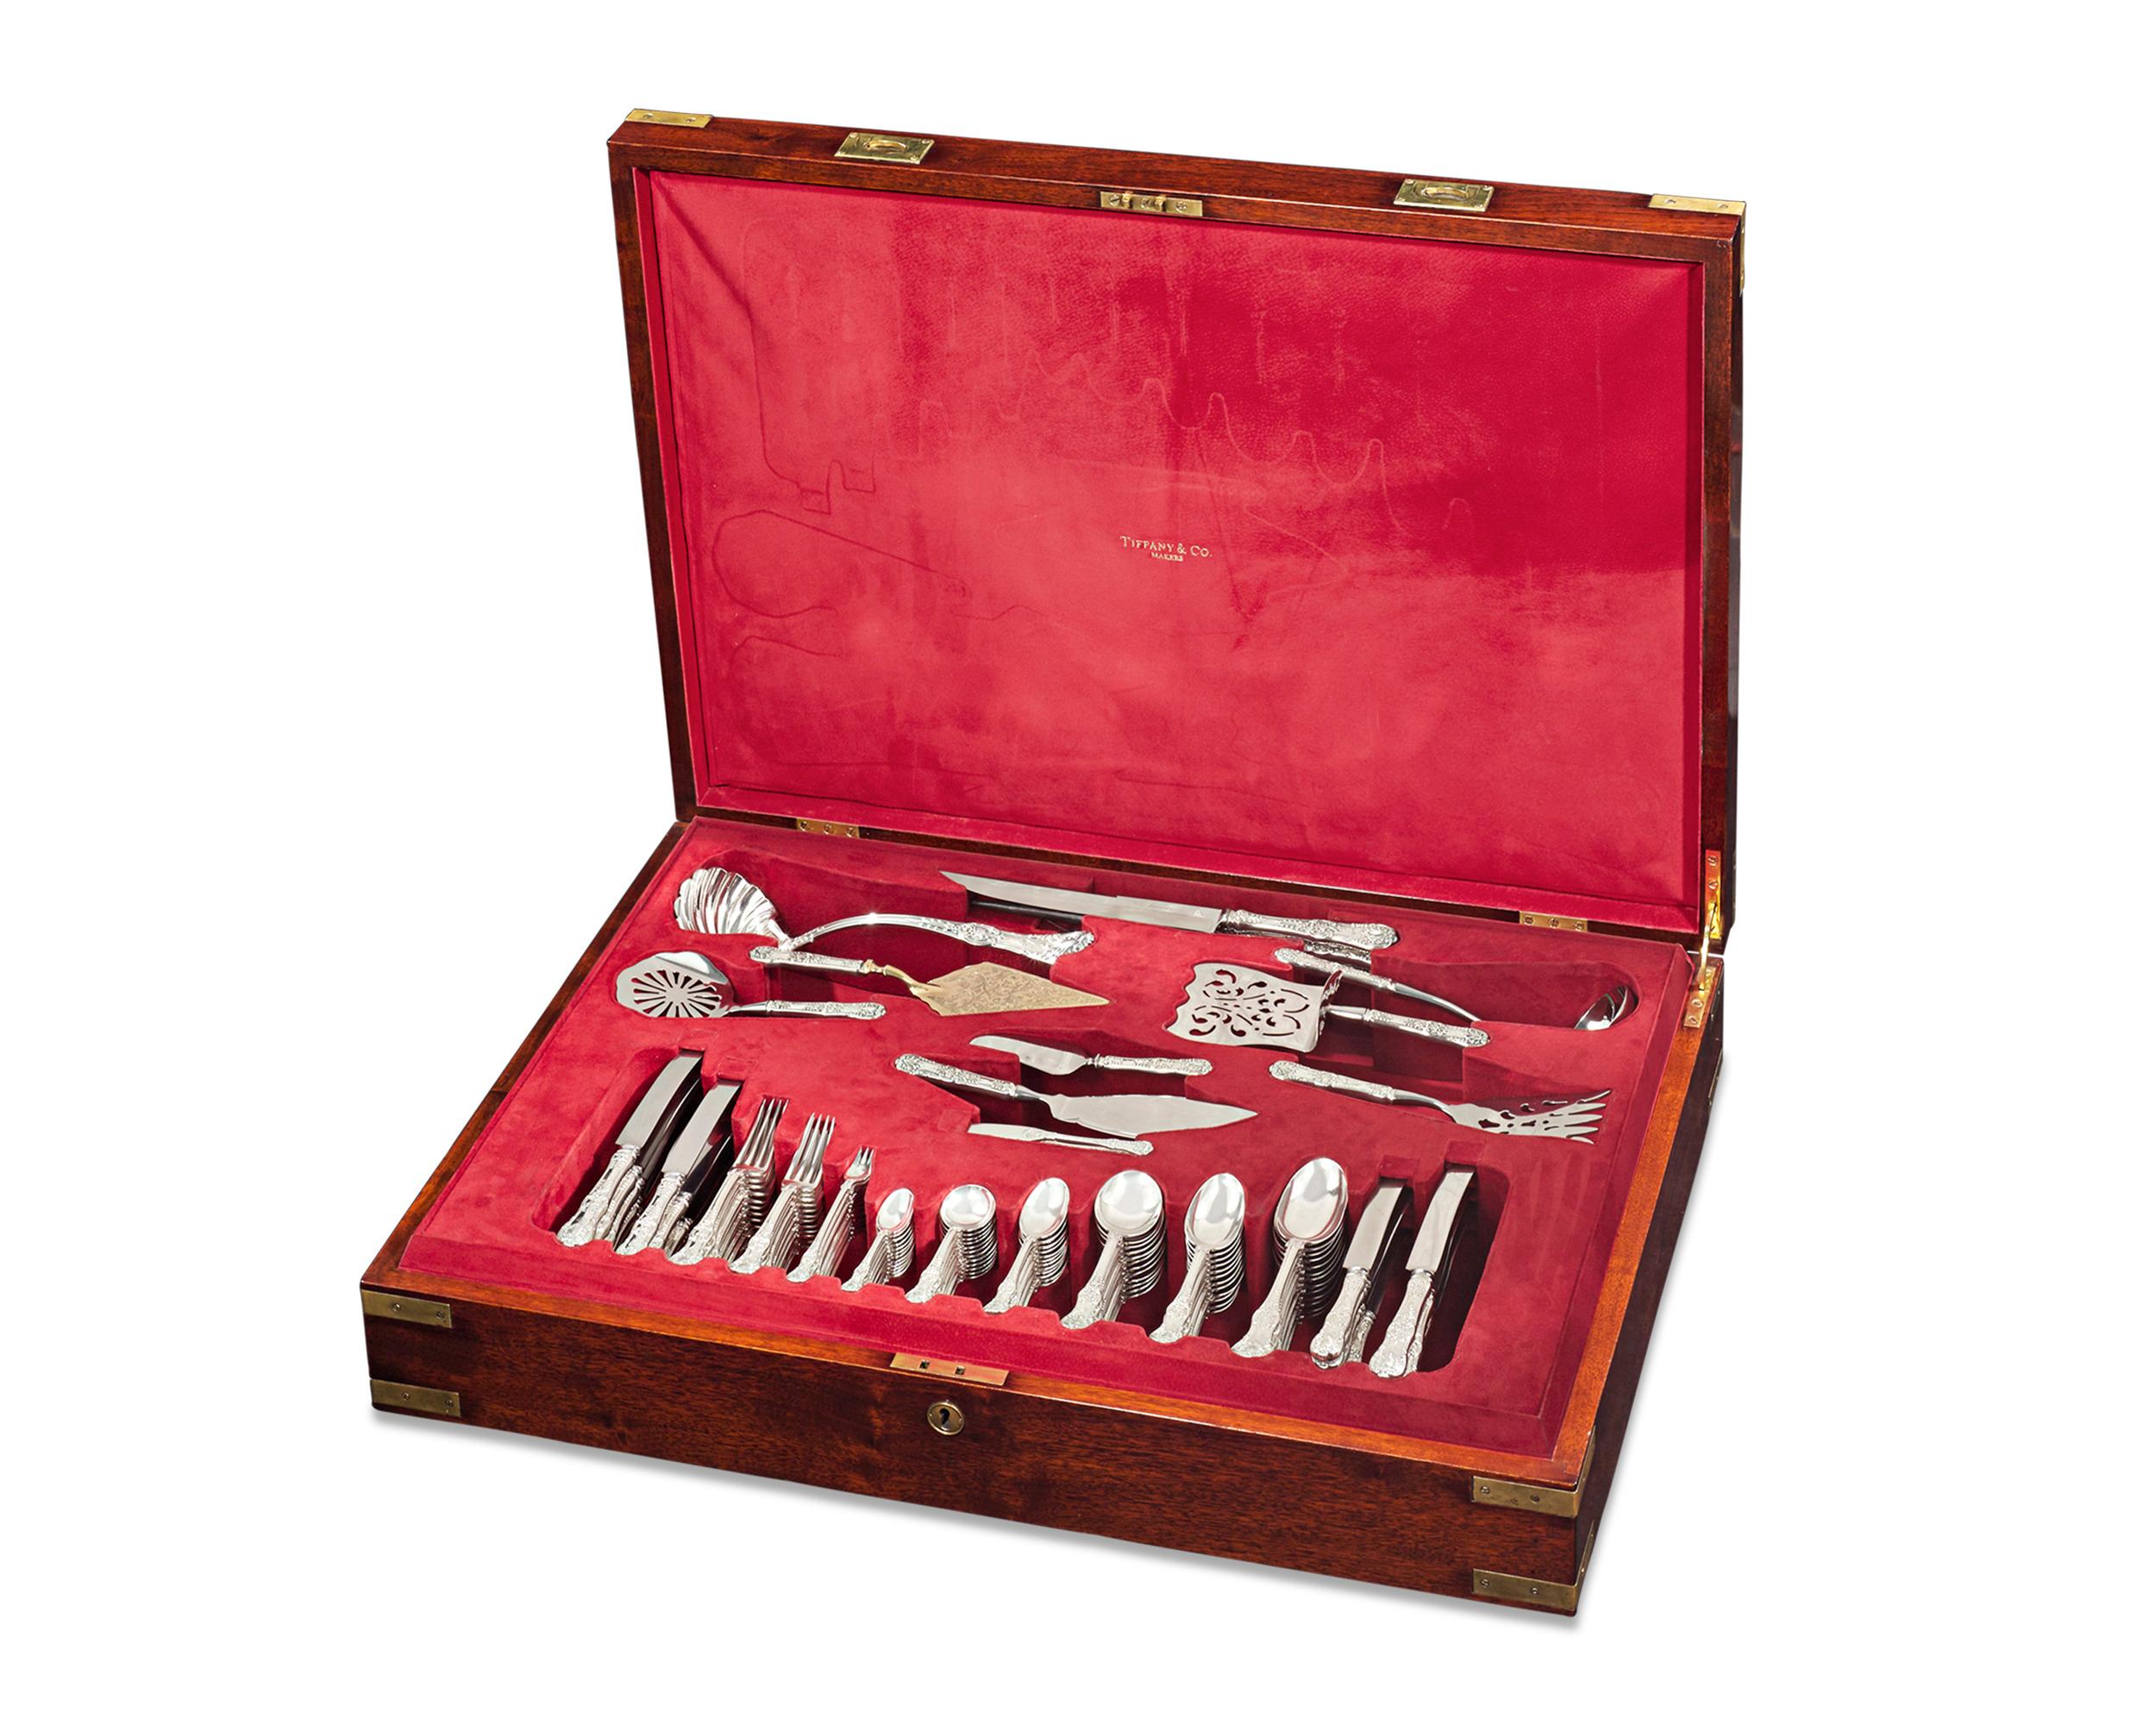 Exquisitely crafted with Tiffany & Co.’s renowned standard of excellence, this English King silver flatware service for 12 provides a sophisticated service for luncheon or dinner. Comprised of 164 total pieces, this extensive service includes a full